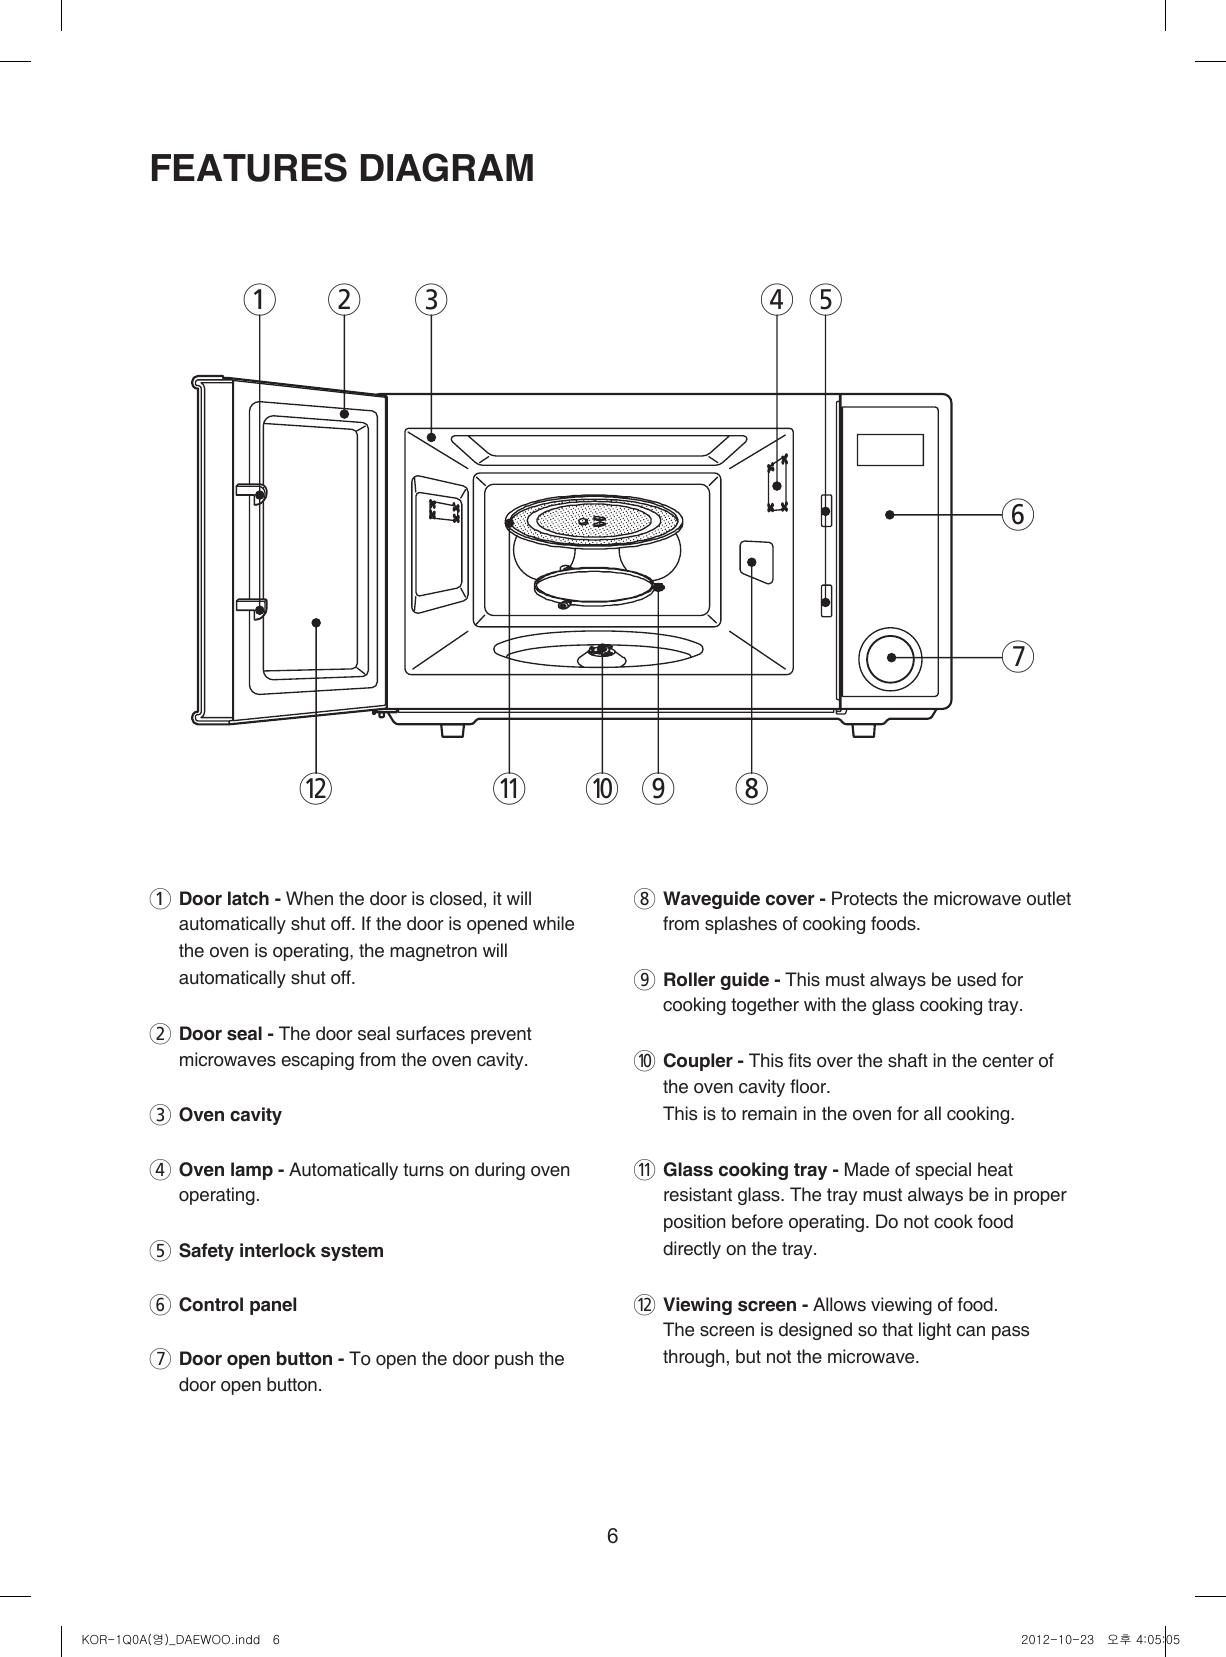 61  Door latch - When the door is closed, it will  automatically shut off. If the door is opened while the oven is operating, the magnetron will automatically shut off.2  Door seal - The door seal surfaces prevent microwaves escaping from the oven cavity.3  Oven cavity4  Oven lamp - Automatically turns on during oven operating.5  Safety interlock system 6  Control panel7  Door open button - To open the door push the door open button.8  Waveguide cover - Protects the microwave outlet from splashes of cooking foods.9  Roller guide - This must always be used for cooking together with the glass cooking tray.0  Coupler - This fits over the shaft in the center of the oven cavity floor.  This is to remain in the oven for all cooking.q  Glass cooking tray - Made of special heat resistant glass. The tray must always be in proper position before operating. Do not cook food directly on the tray.w  Viewing screen - Allows viewing of food.  The screen is designed so that light can pass through, but not the microwave.FEATURES DIAGRAM1234567890qwKOR-1Q0A(영)_DAEWOO.indd   6 2012-10-23   오후 4:05:05